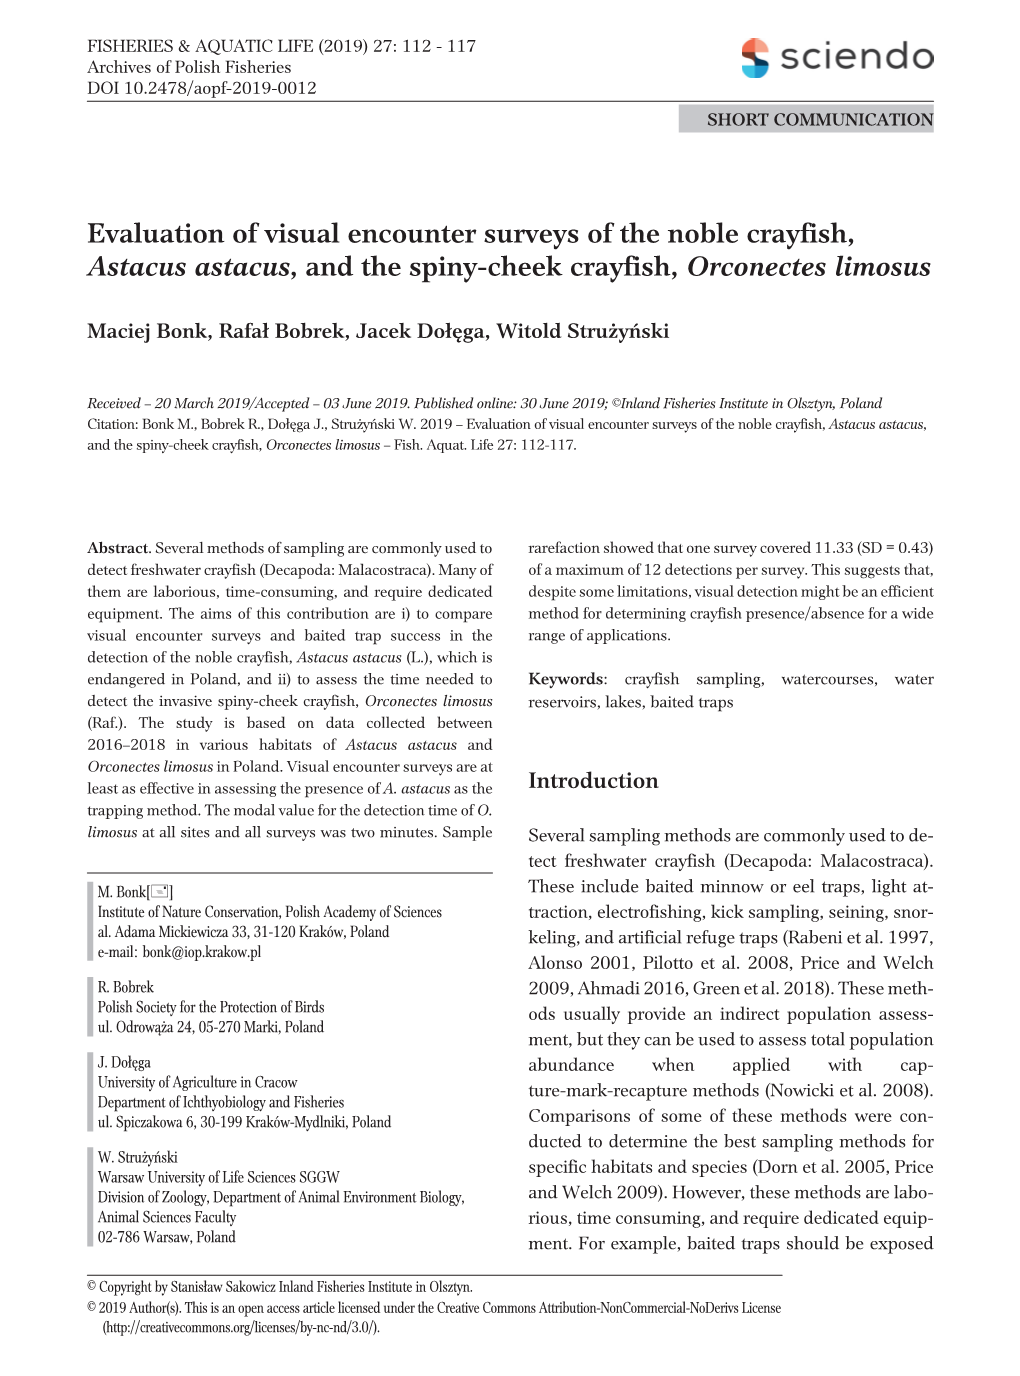 Evaluation of Visual Encounter Surveys of the Noble Crayfish, Astacus Astacus, and the Spiny-Cheek Crayfish, Orconectes Limosus